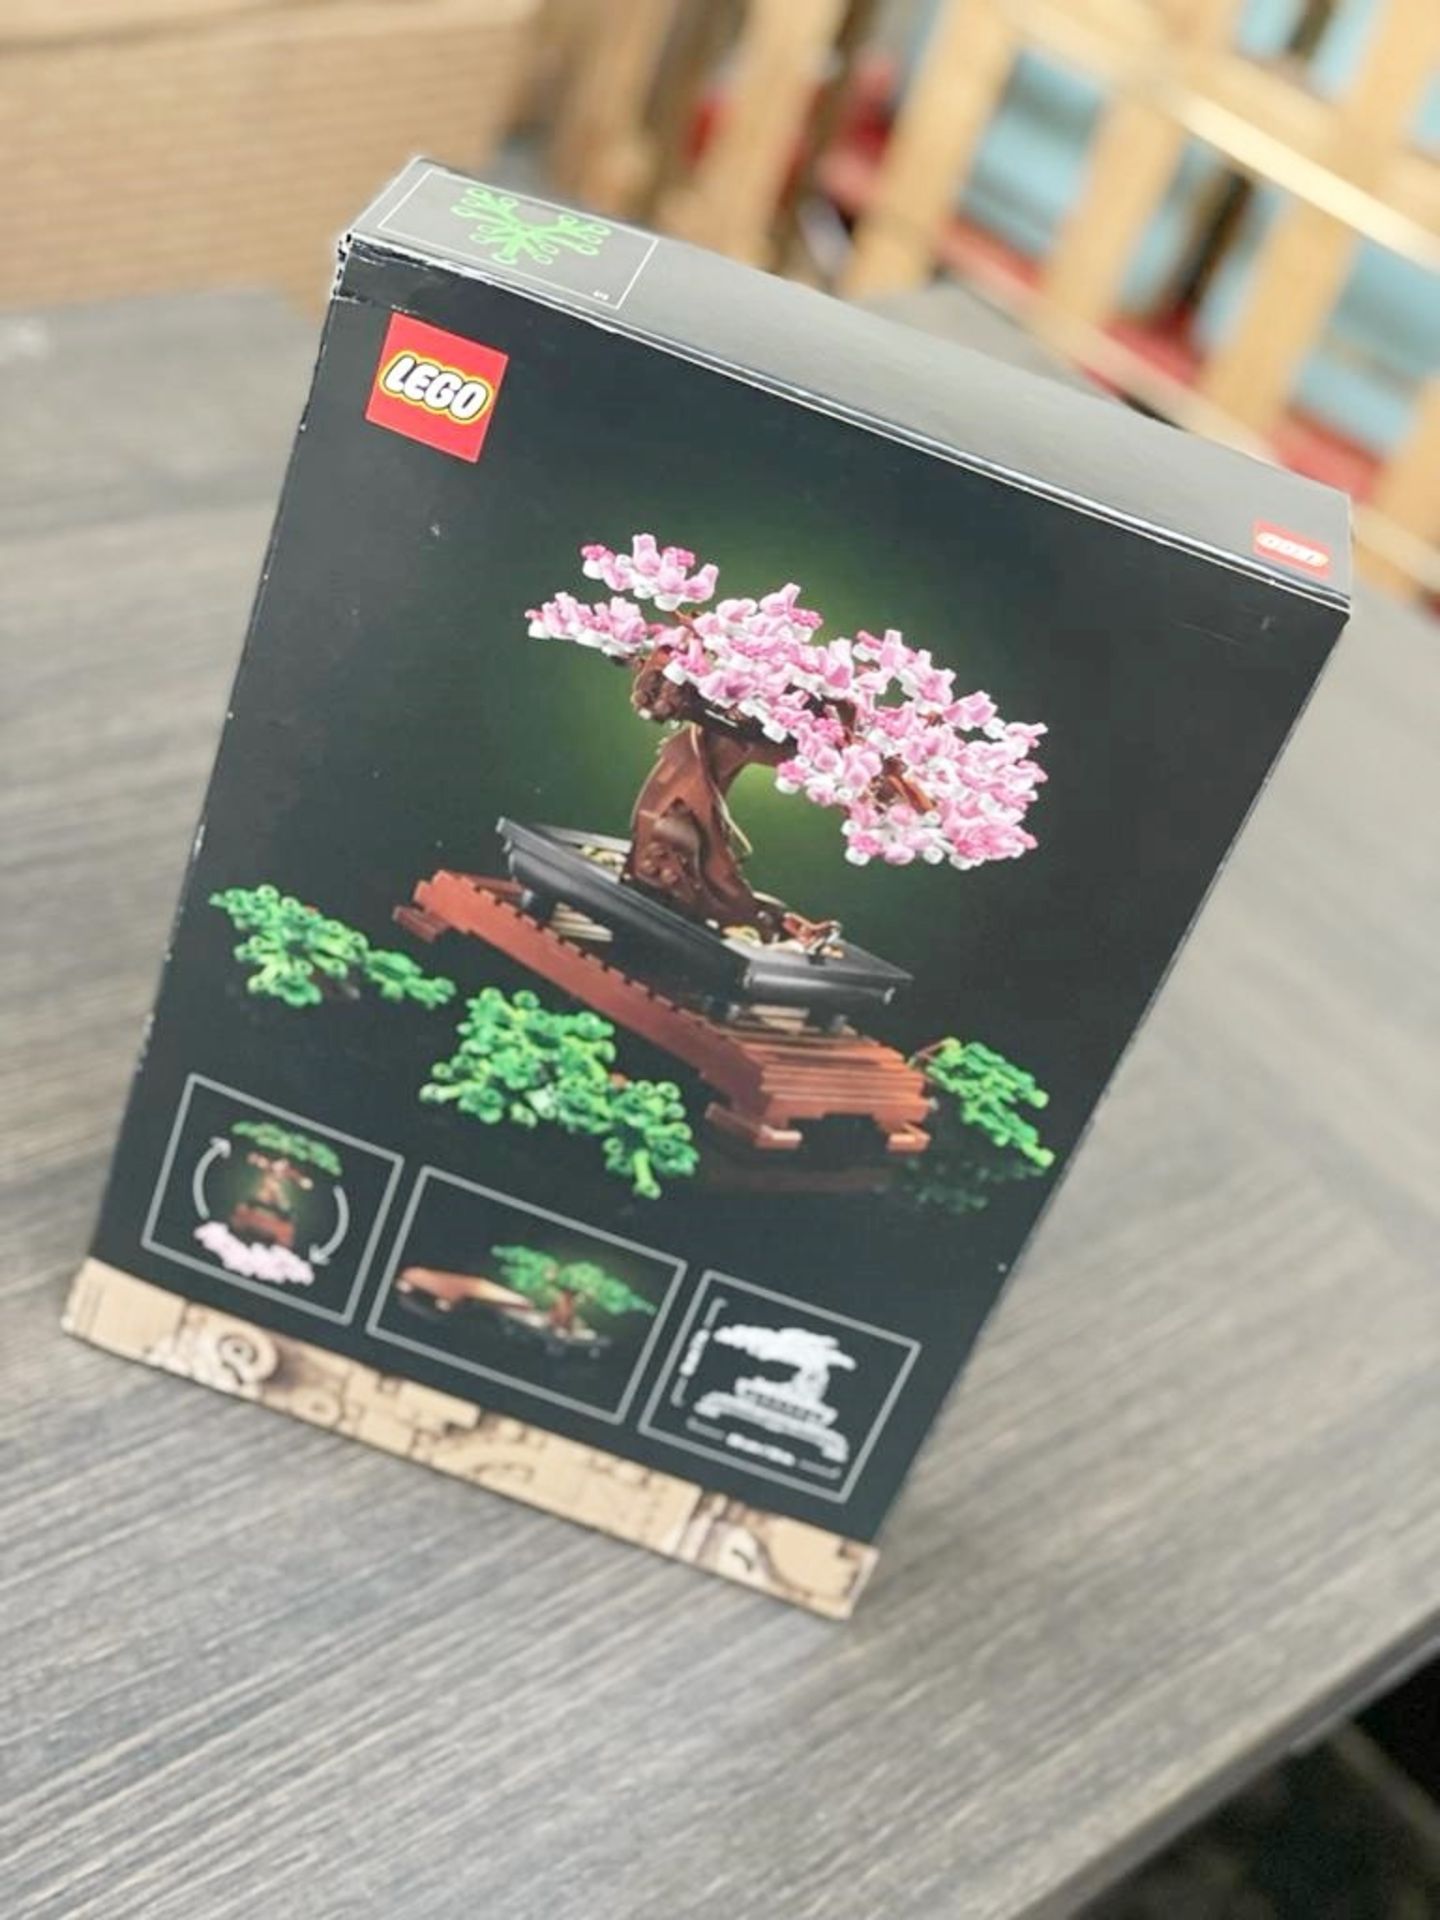 1 x Lego Botanical Collection Bonsai Tree 878 Pieces 18+ (10281) - Brand New - CL987 - Ref: - Image 2 of 5